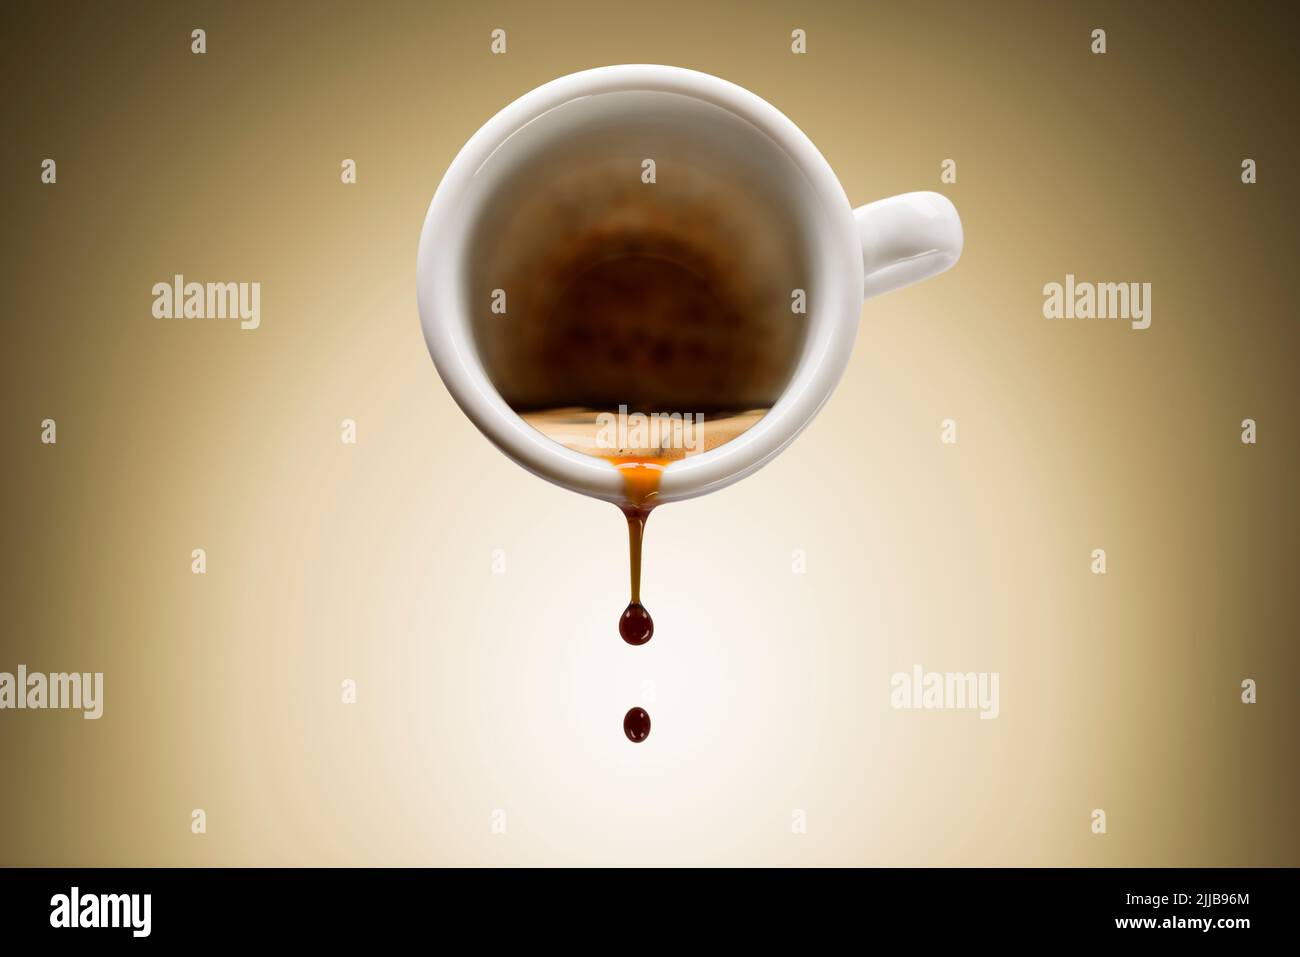 cup of coffee pours dripping coffee, on brown background. Stock Photo